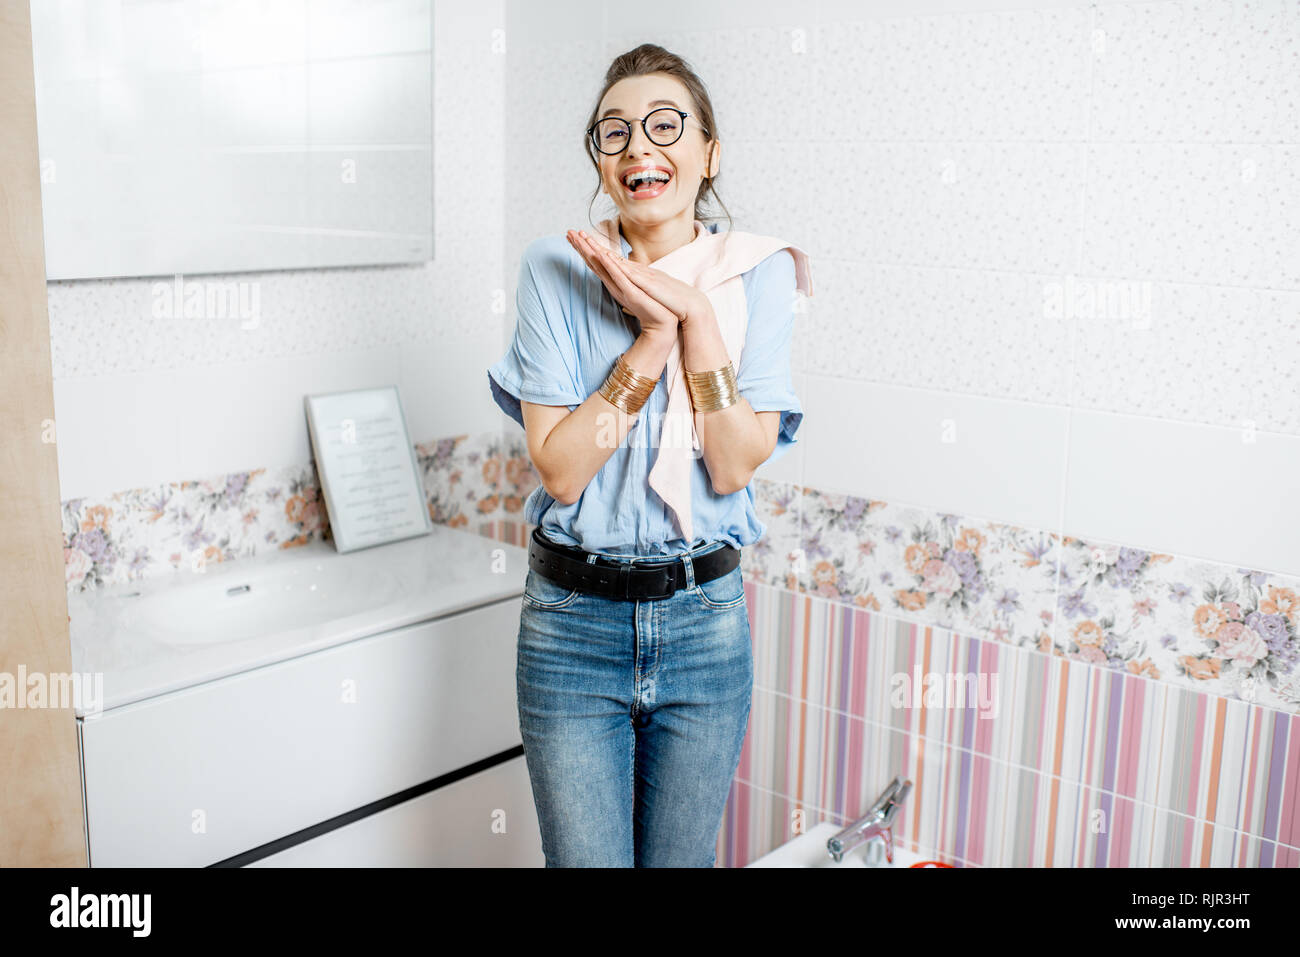 Portrait of a happy woman with excited emotions in the bathroom corner of the shop with ceramic tiles and sanitary goods Stock Photo